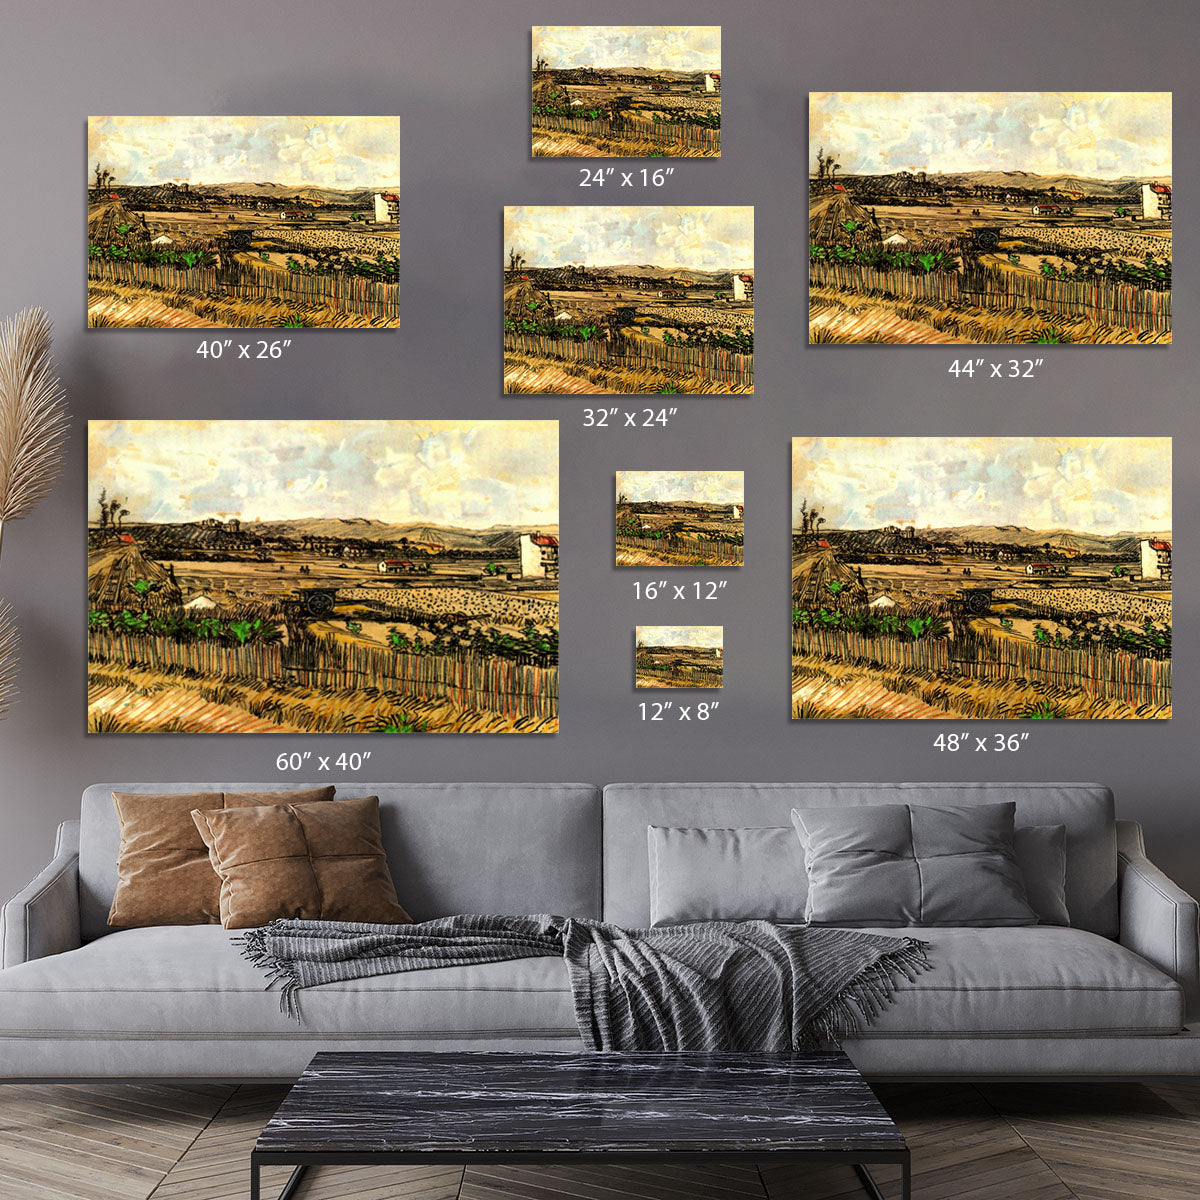 Harvest in Provence at the Left Montmajour by Van Gogh Canvas Print or Poster - Canvas Art Rocks - 7